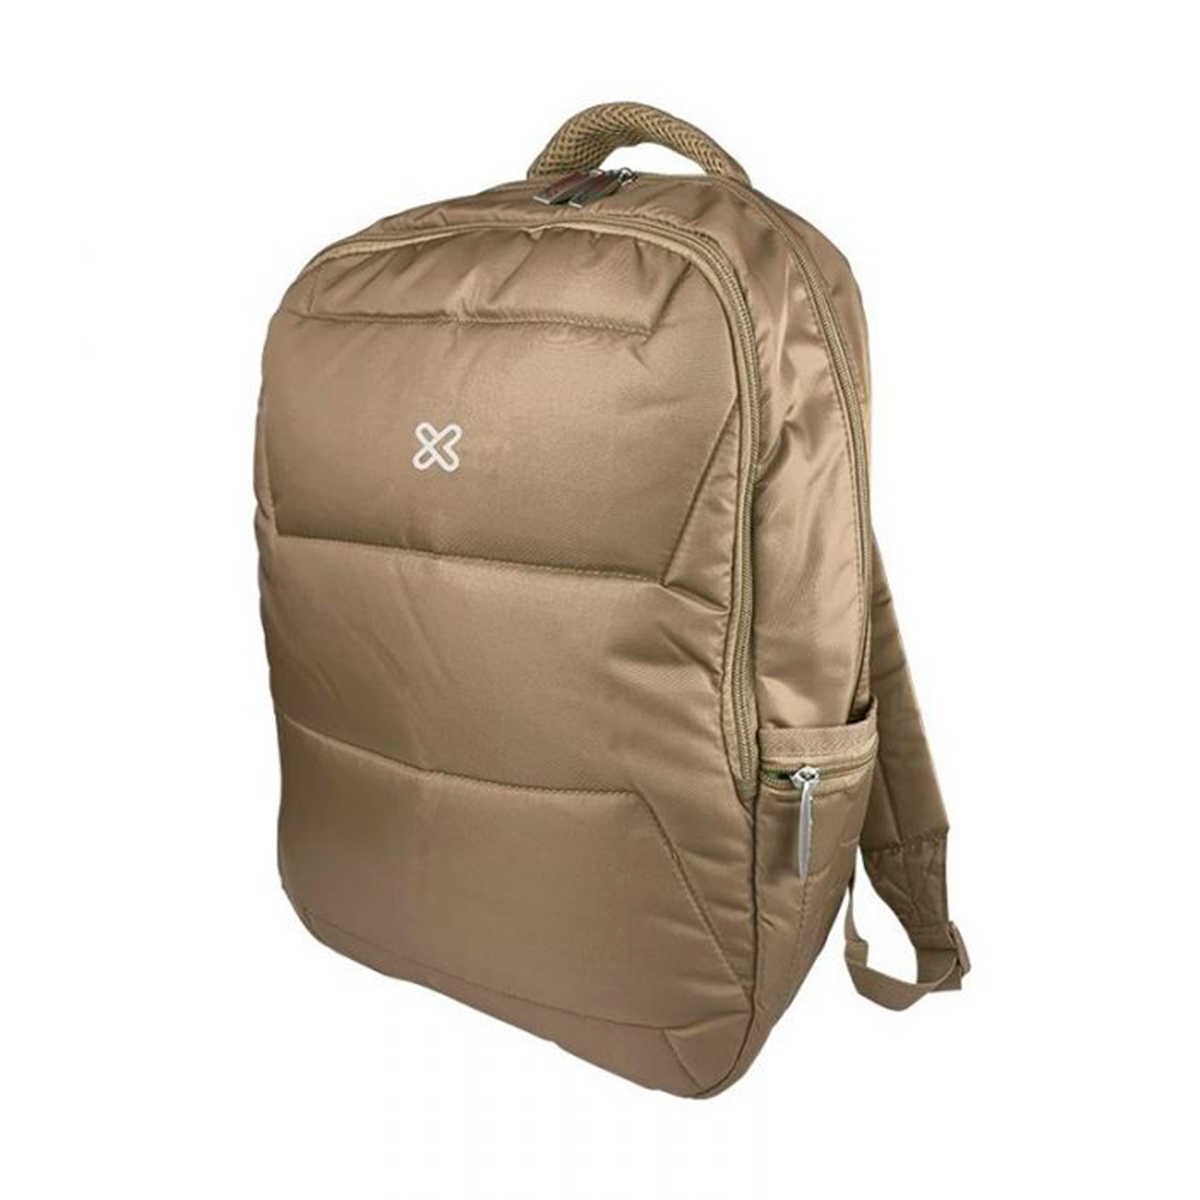 AN121KLX41 – KLIP XTREME – NOTEBOOK CARRYING BACKPACK.02